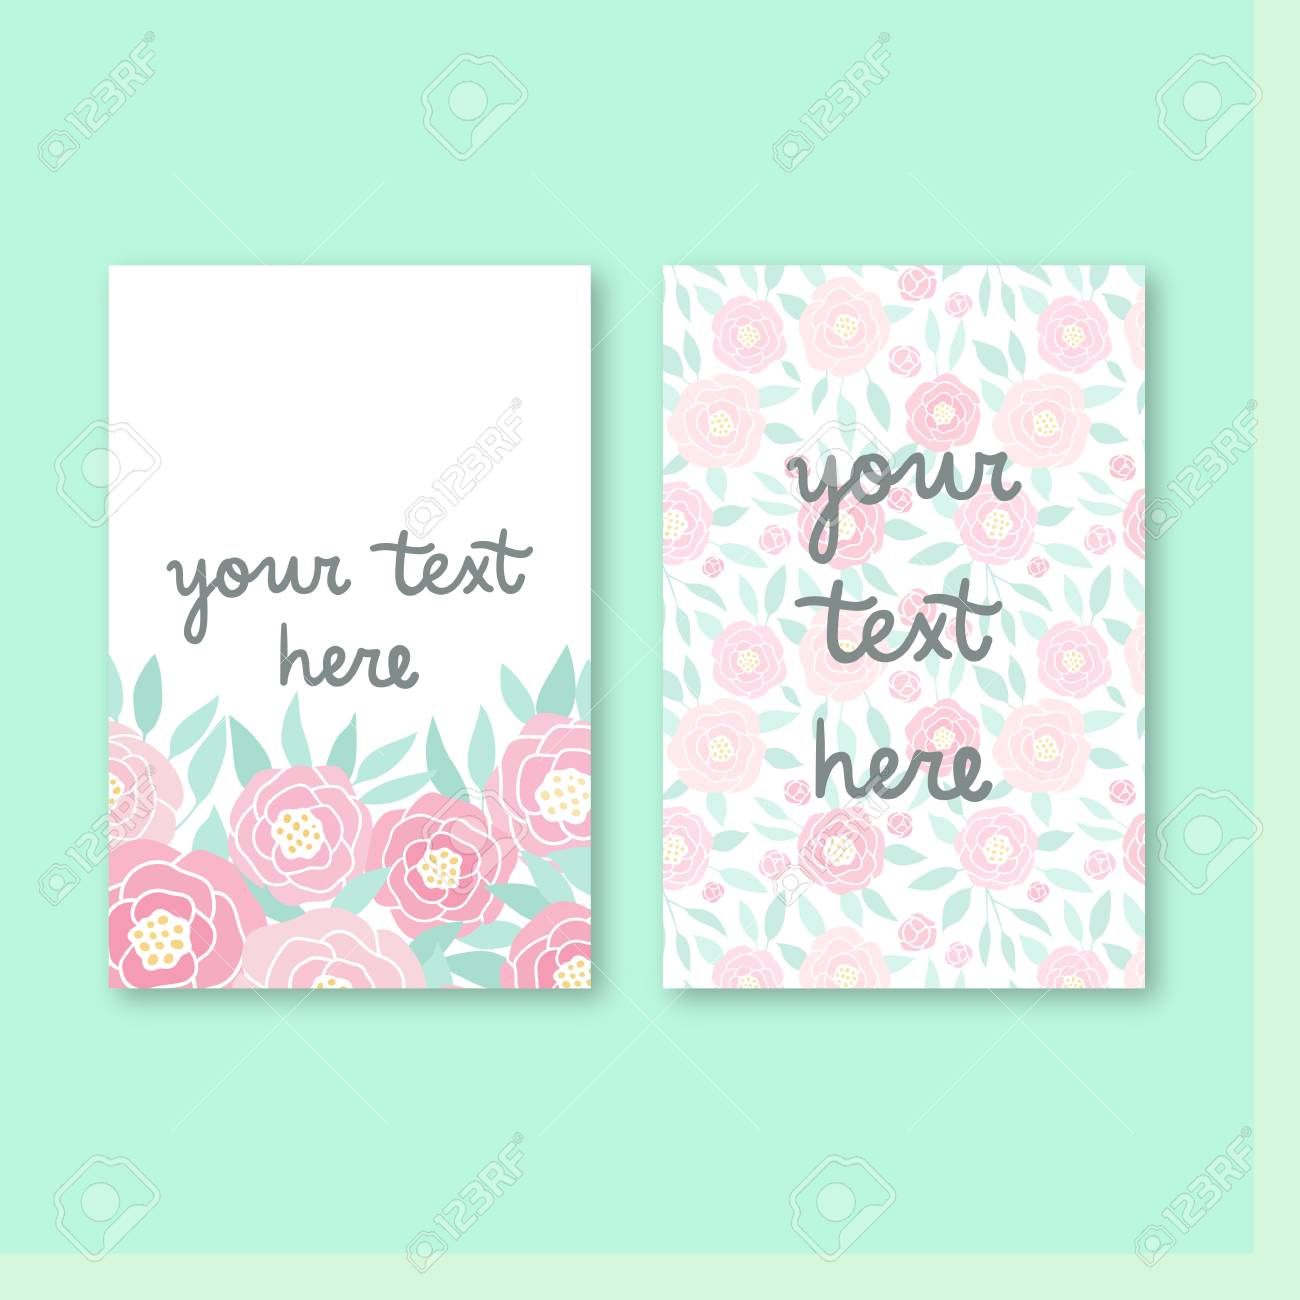 Two Cute Invitation Templates Vector Hand Drawn Cards Stock Photo within size 1300 X 1300